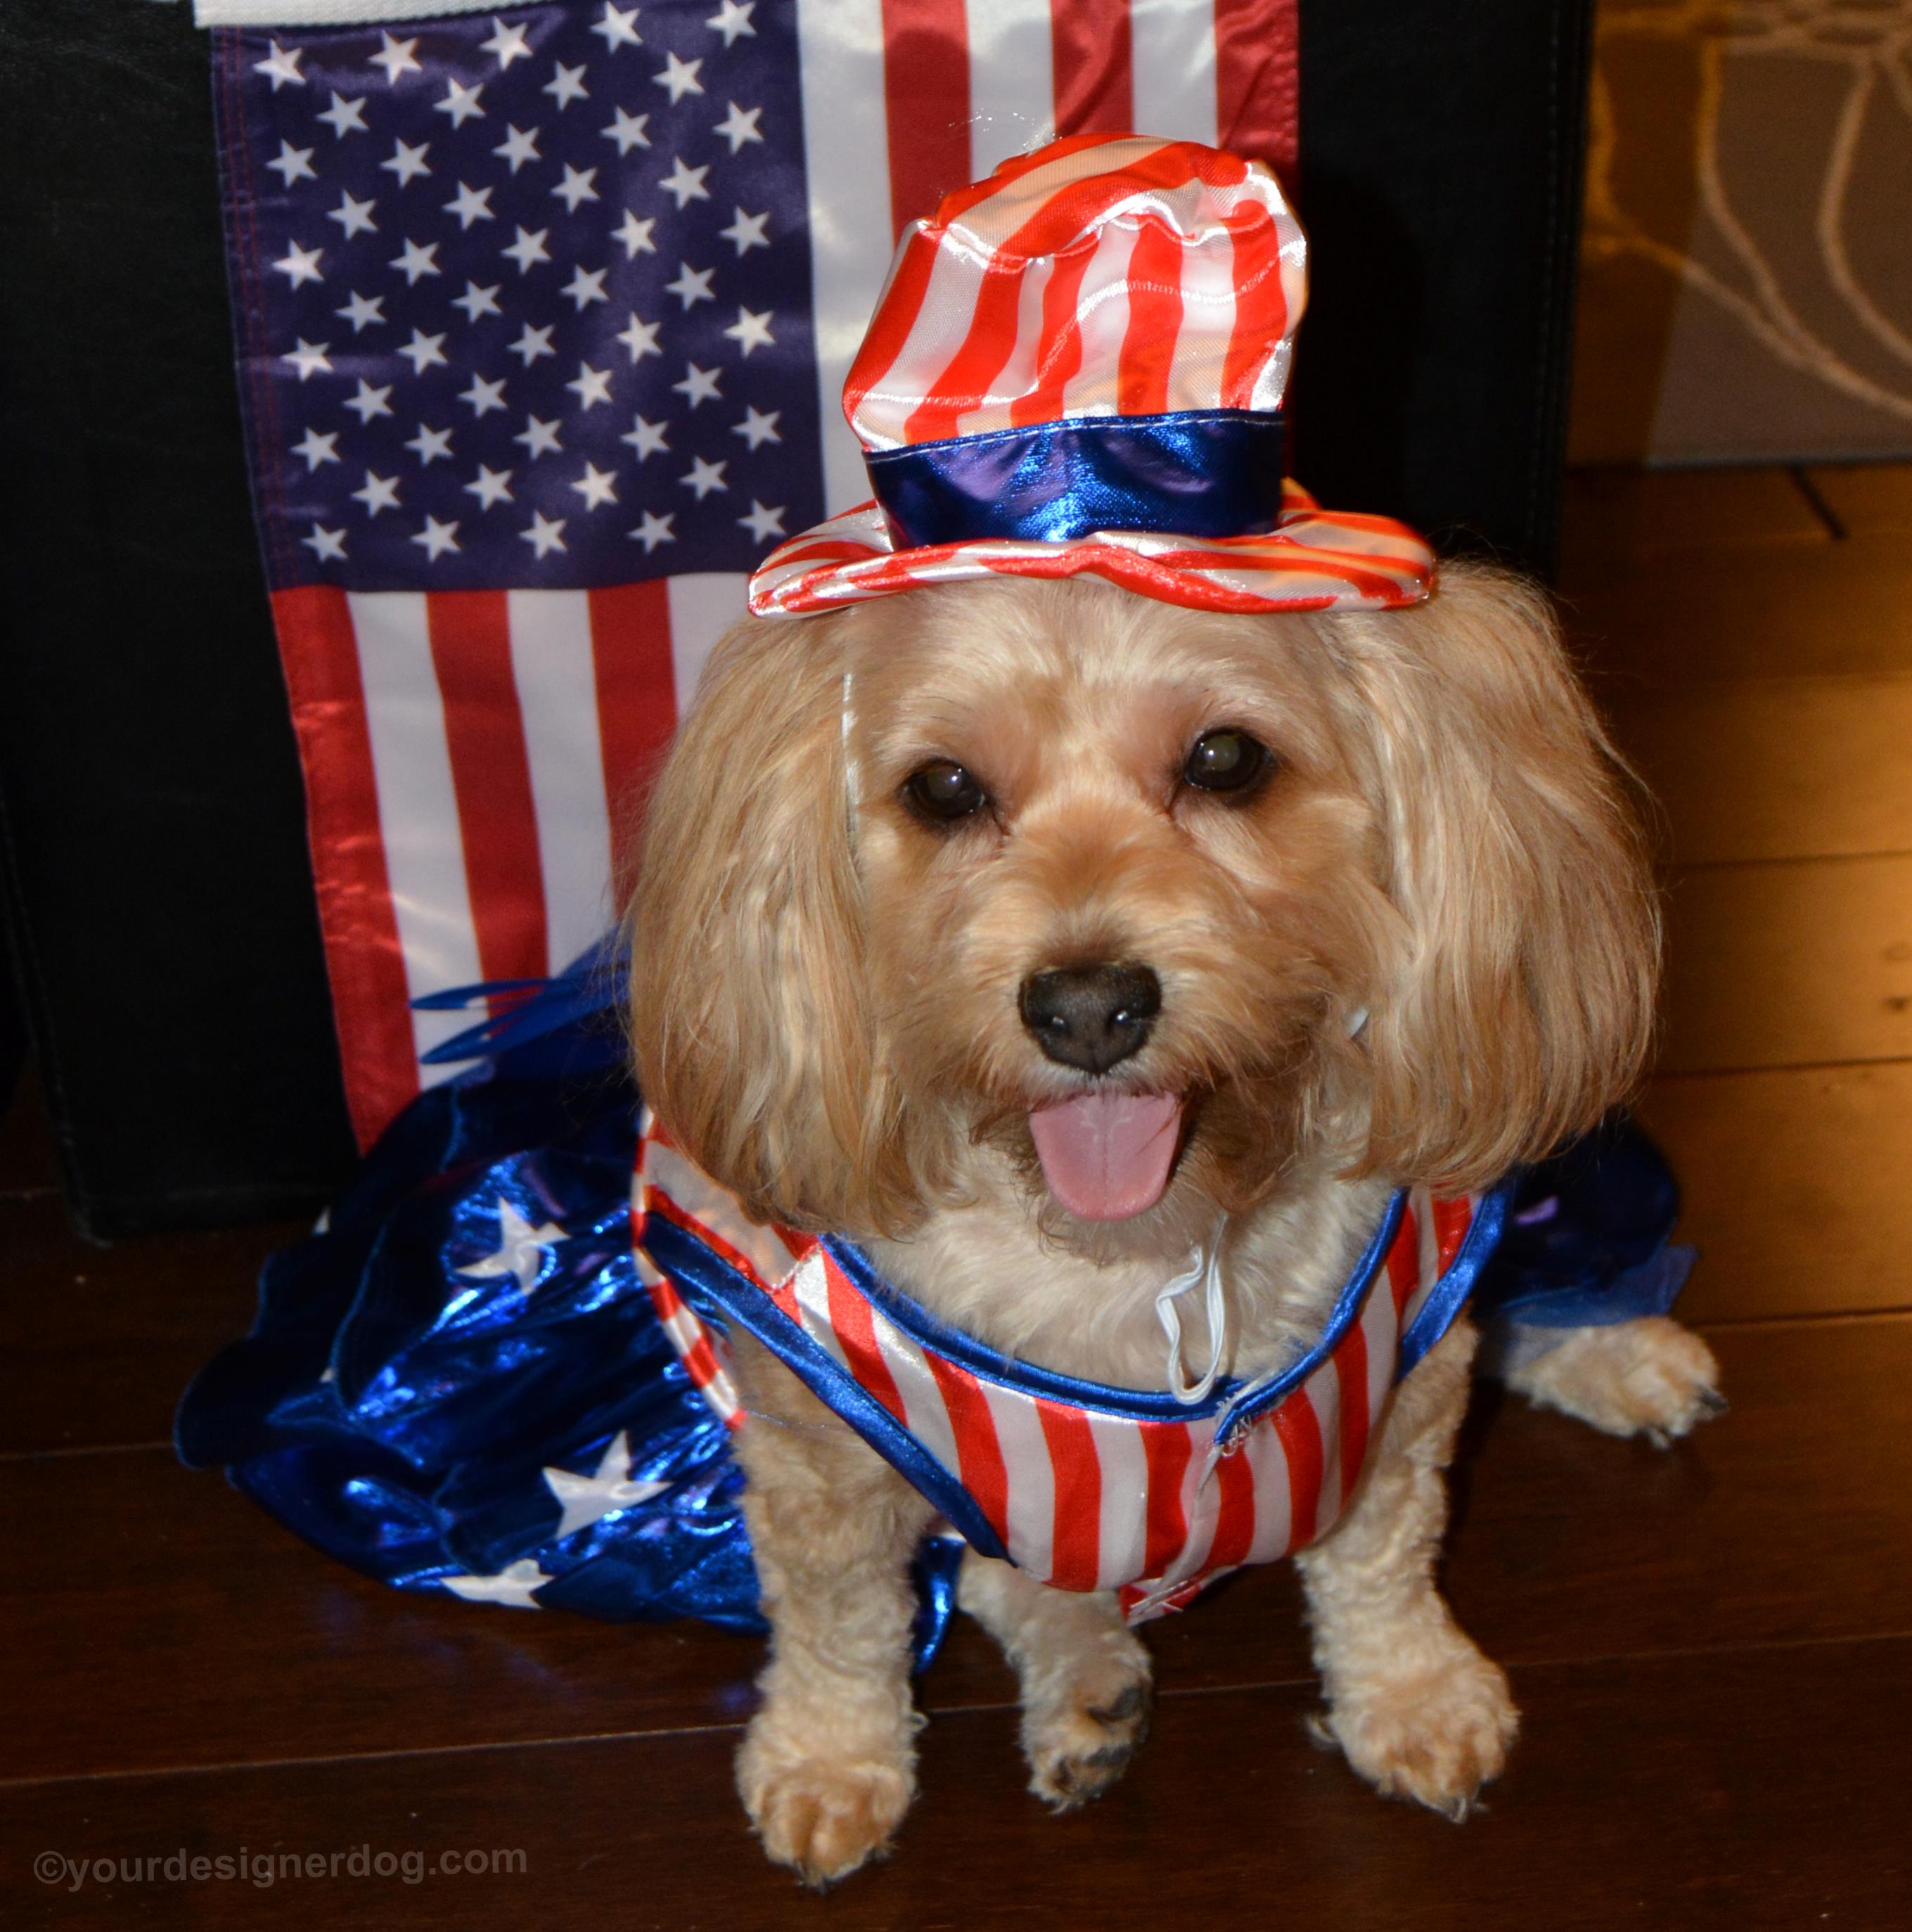 dogs, designer dogs, yorkipoo, yorkie poo, patriotic, tongue out, dog costume